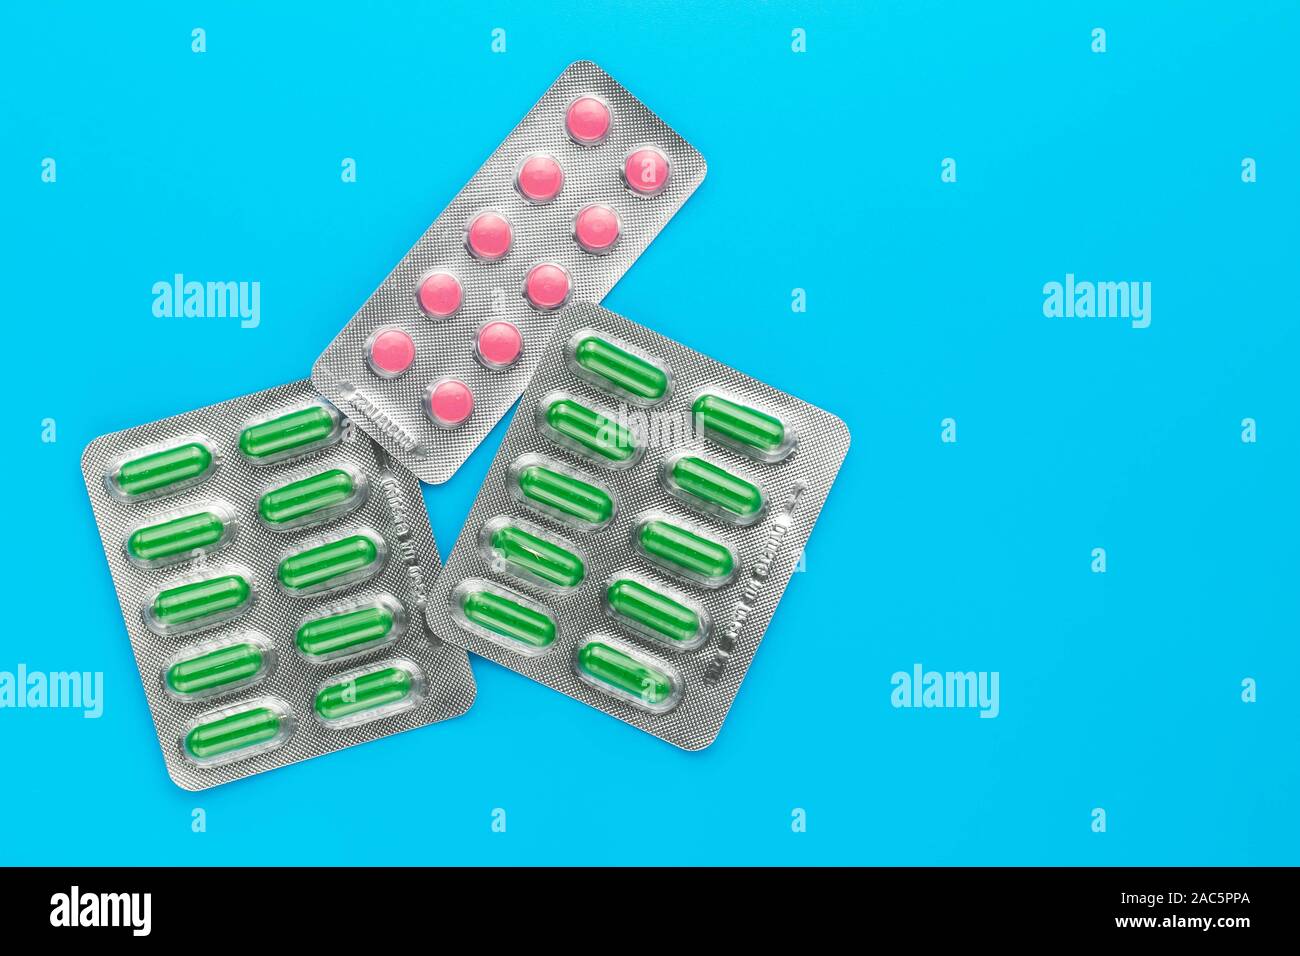 Pack of pills on a blue background. Copy space. Blisters of pink tablets and green capsules. Medicine concept. Stock Photo